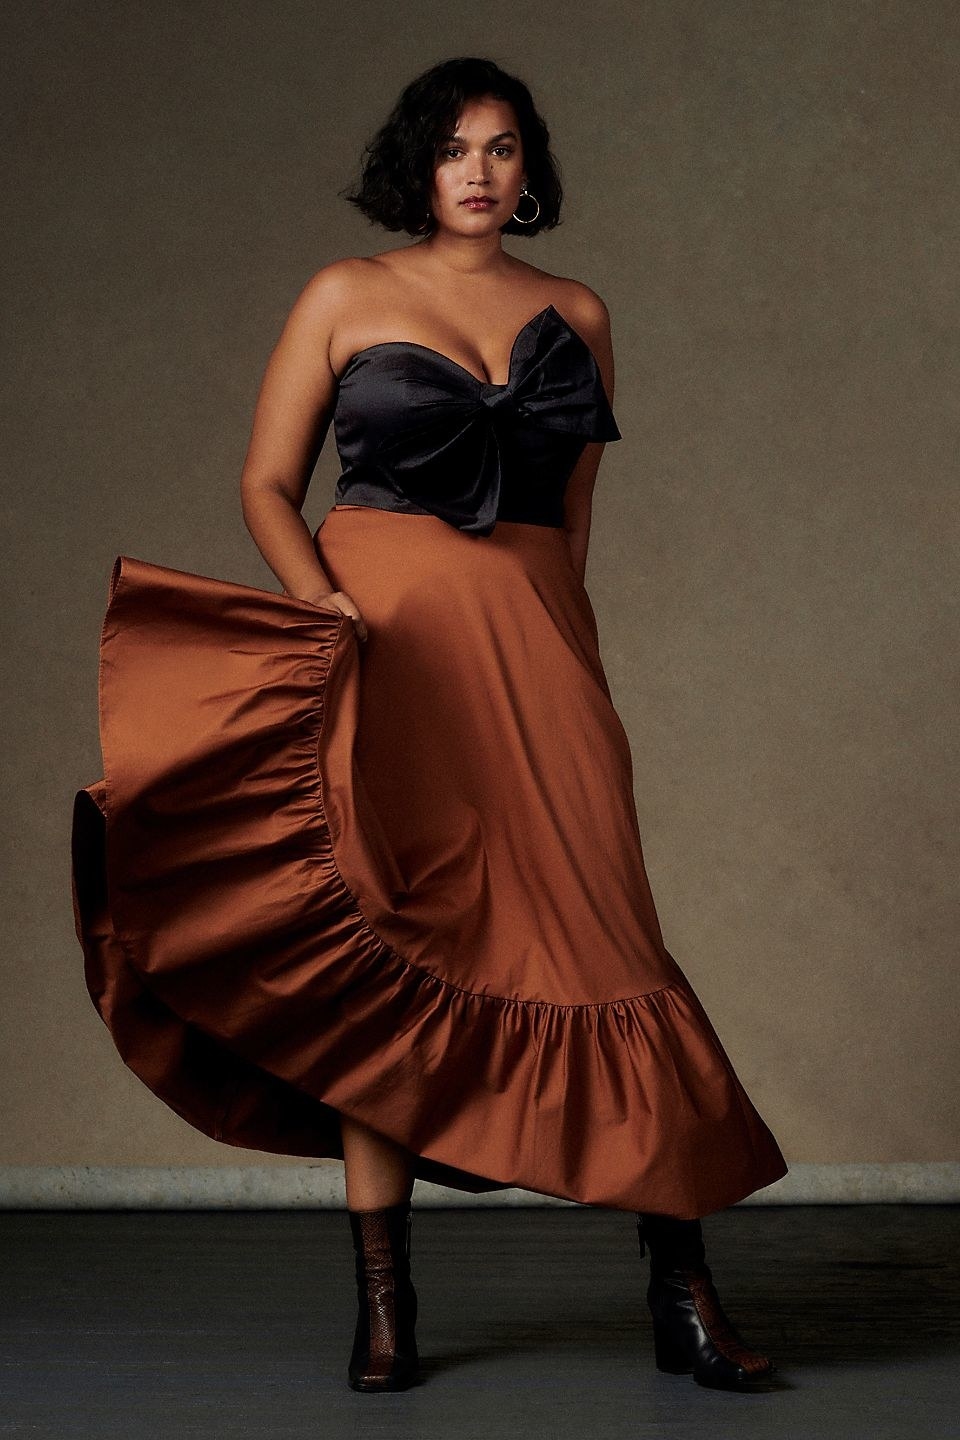 Model in the colorway with black bodice and bronze-brown skirt